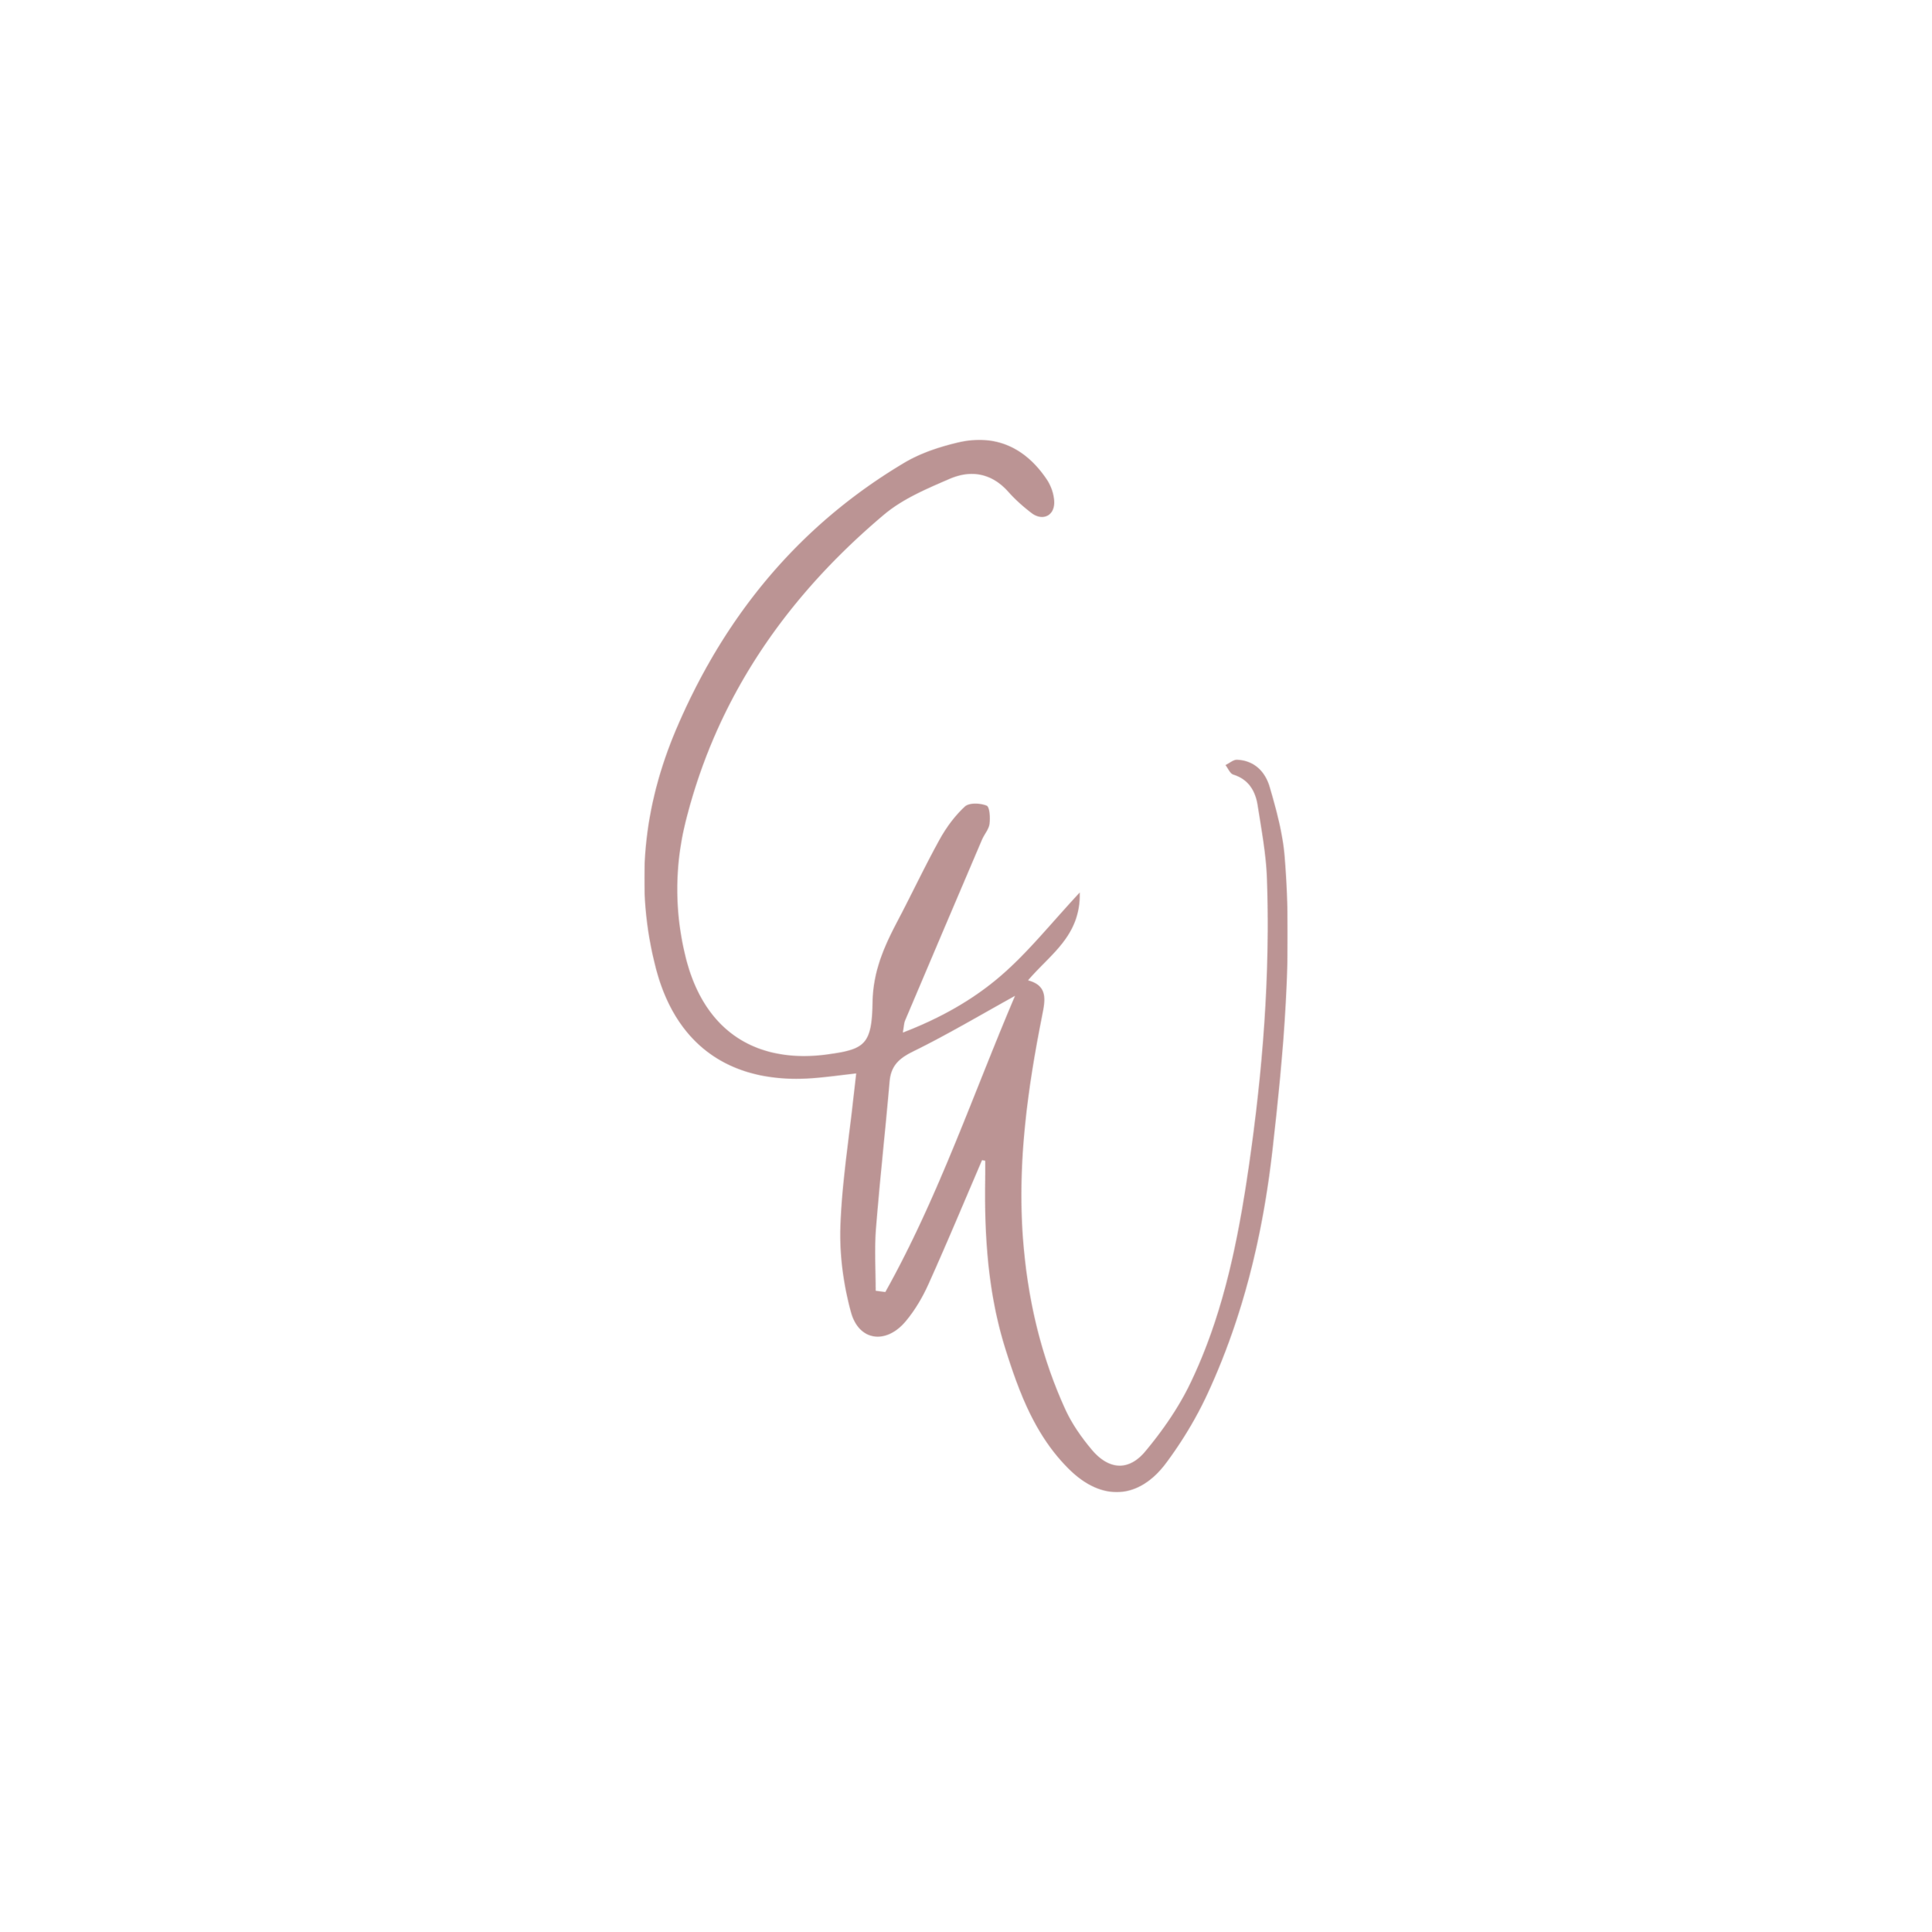 CW ROSE GOLD MARKS .png